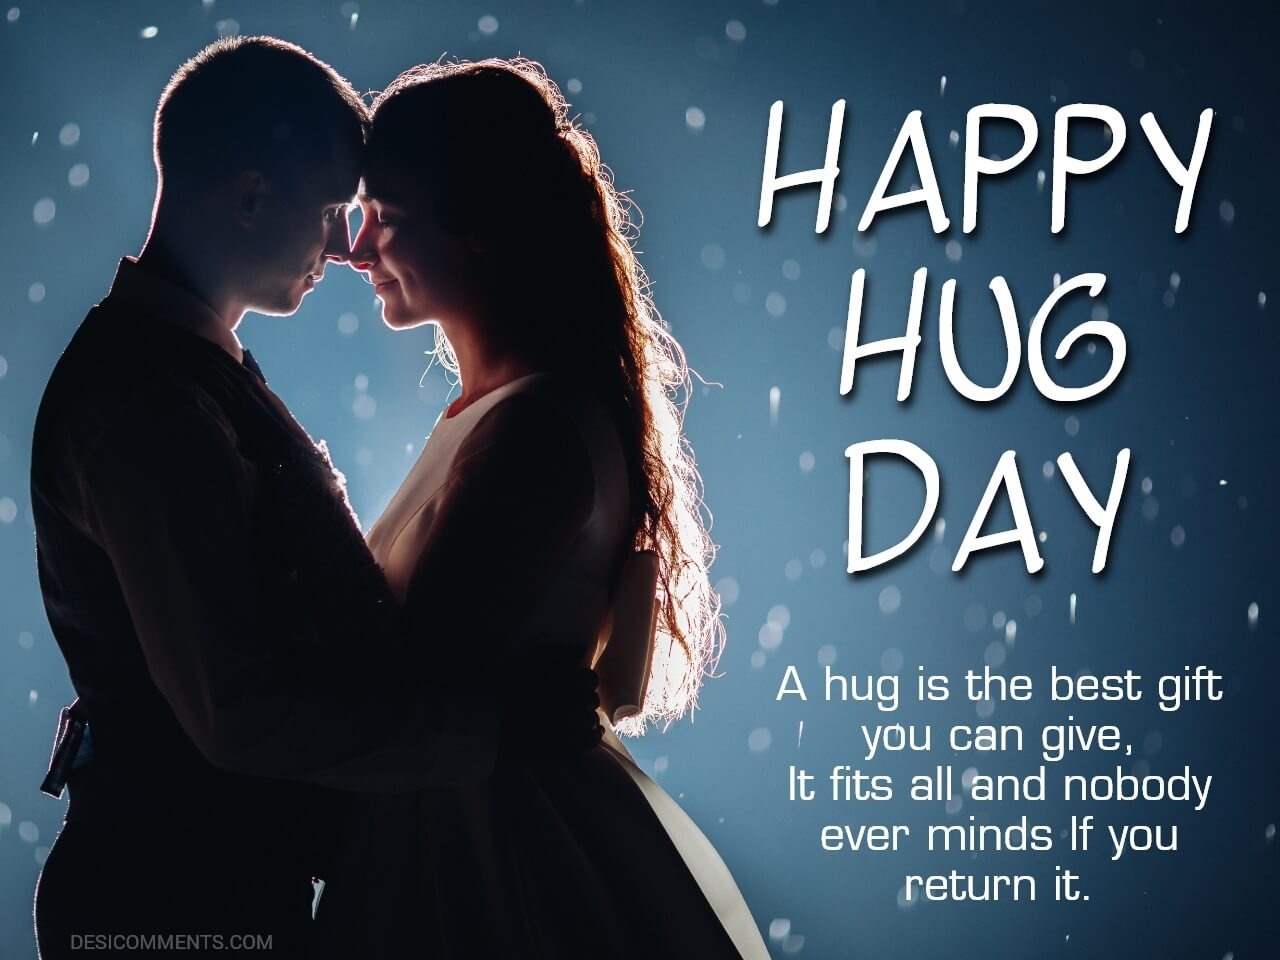 Hug Day Picture, Image, Photo